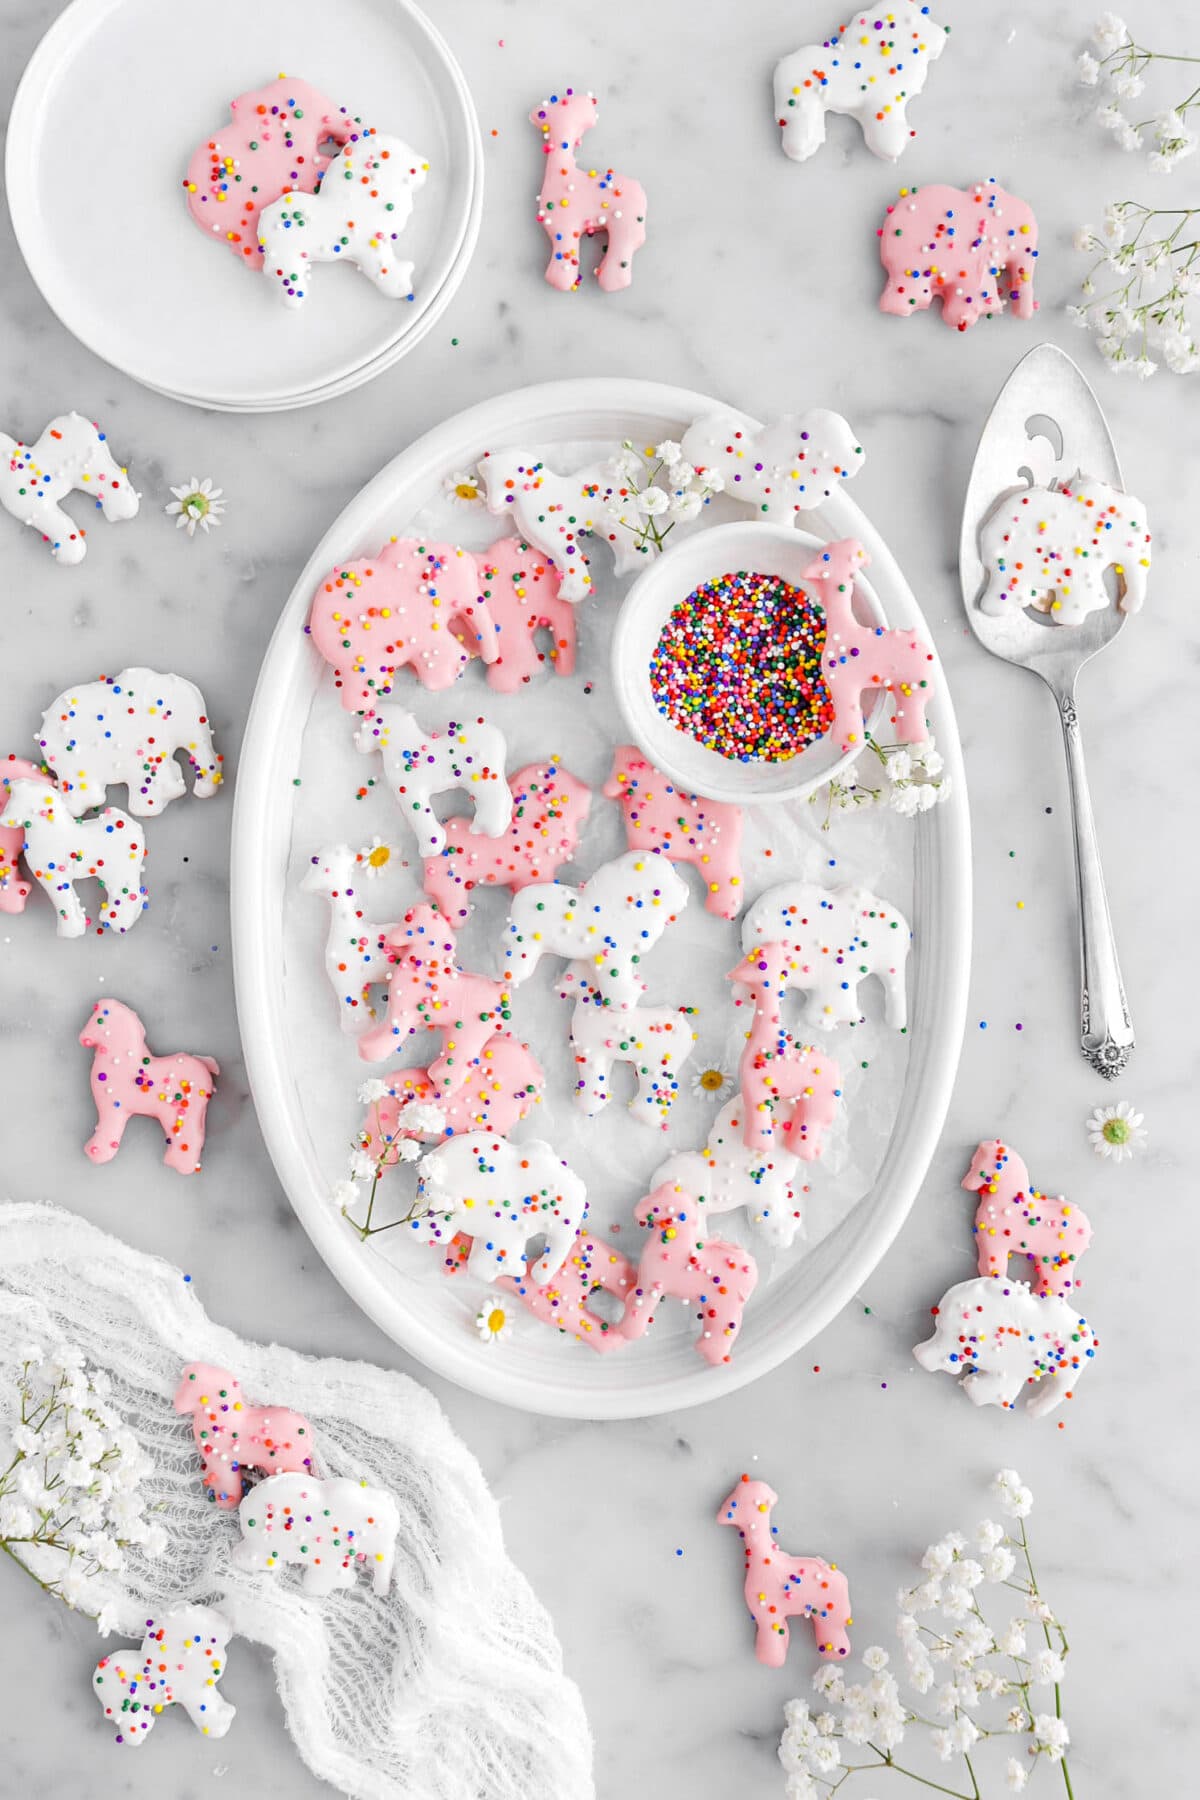 Homemade Frosted Animal Crackers